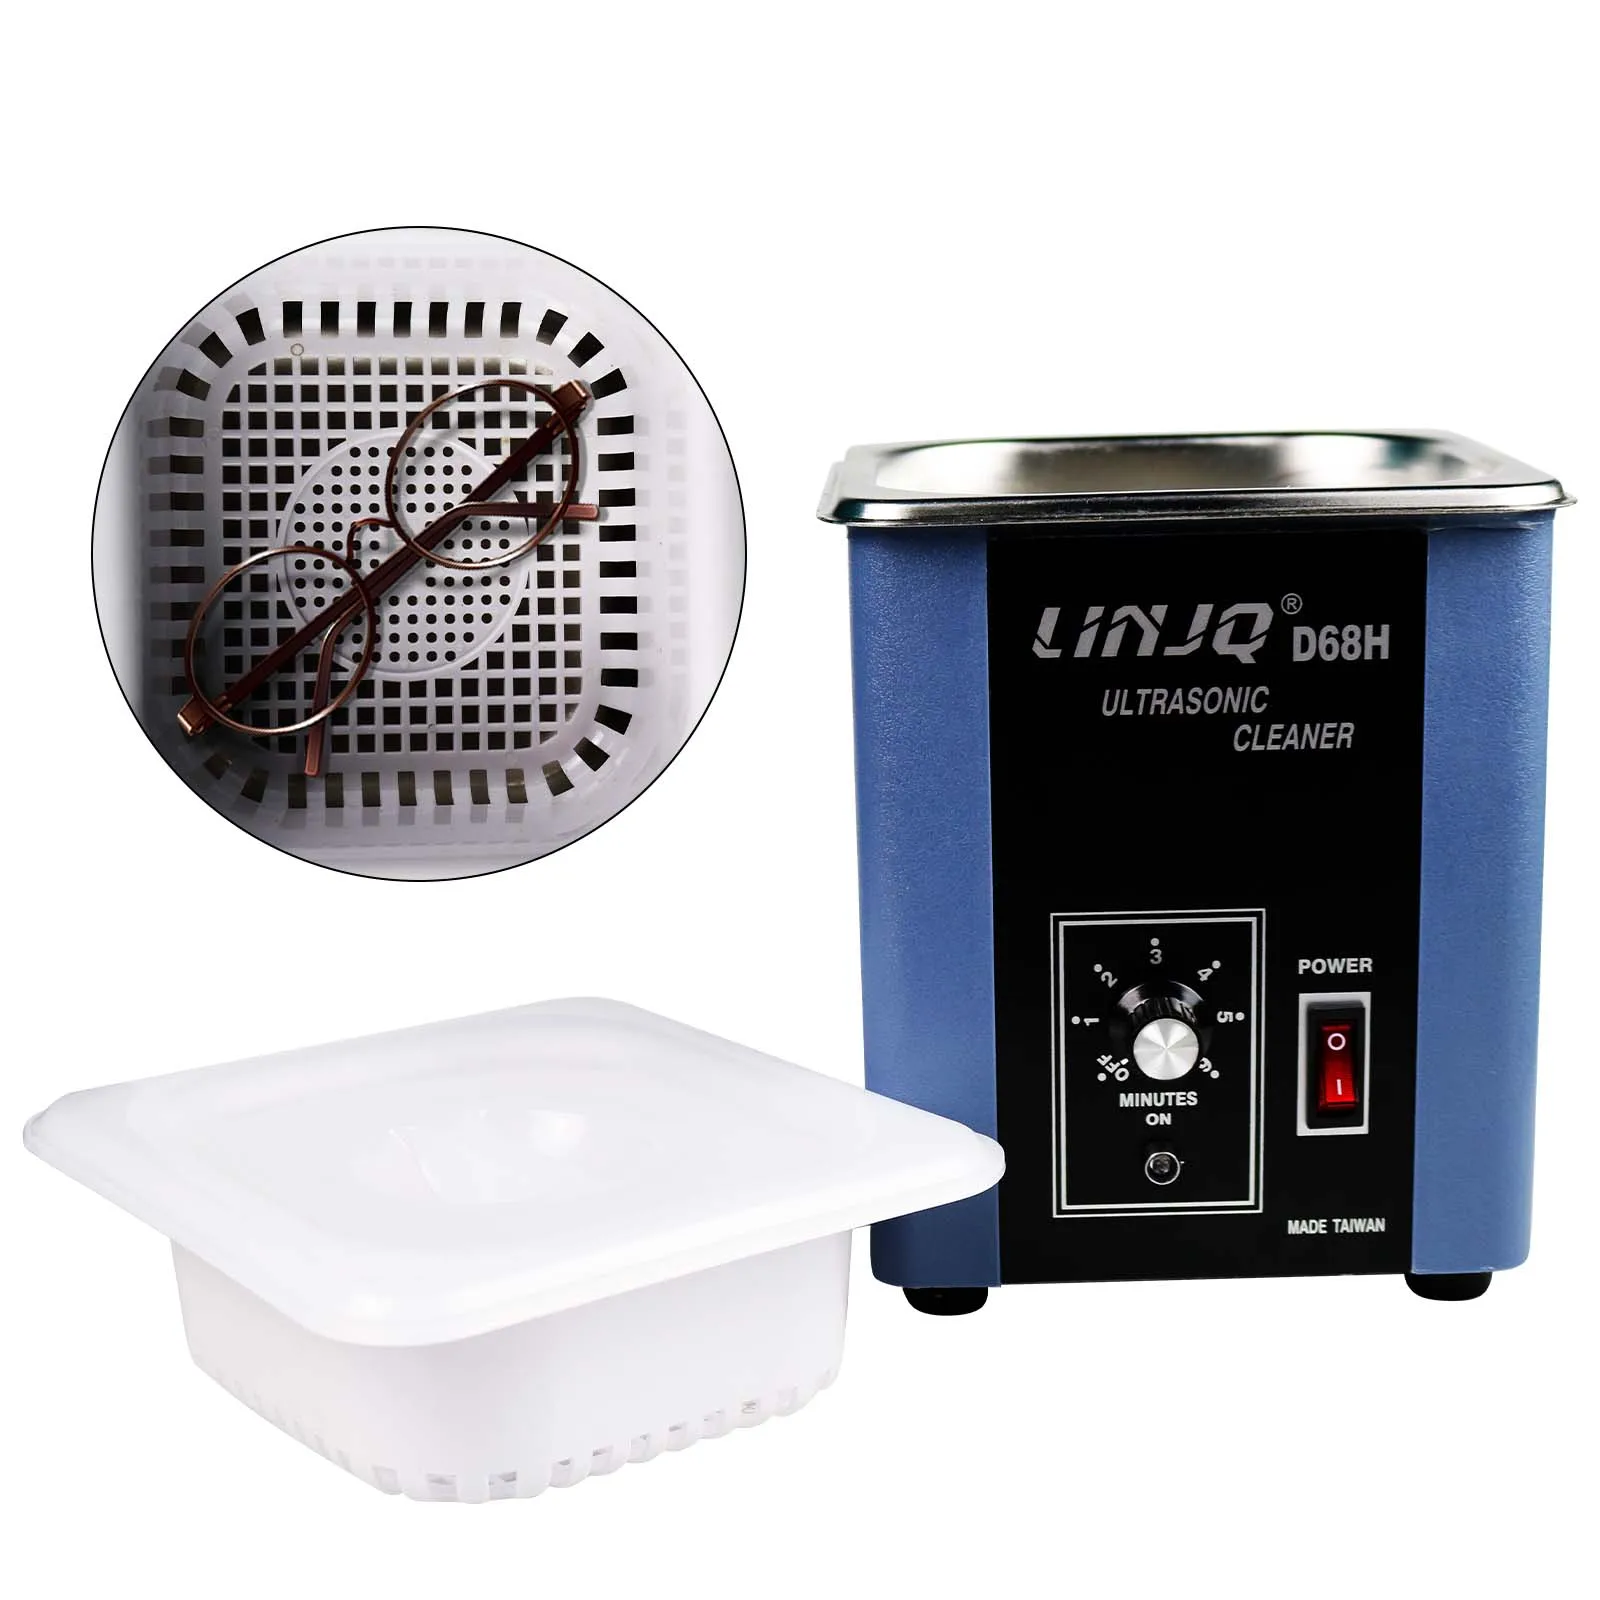 

1.6L Ultrasonic Cleaning Device, Used for Cleaning Glass Items, Watch Components, Small Parts, Circuit Boards for Professional